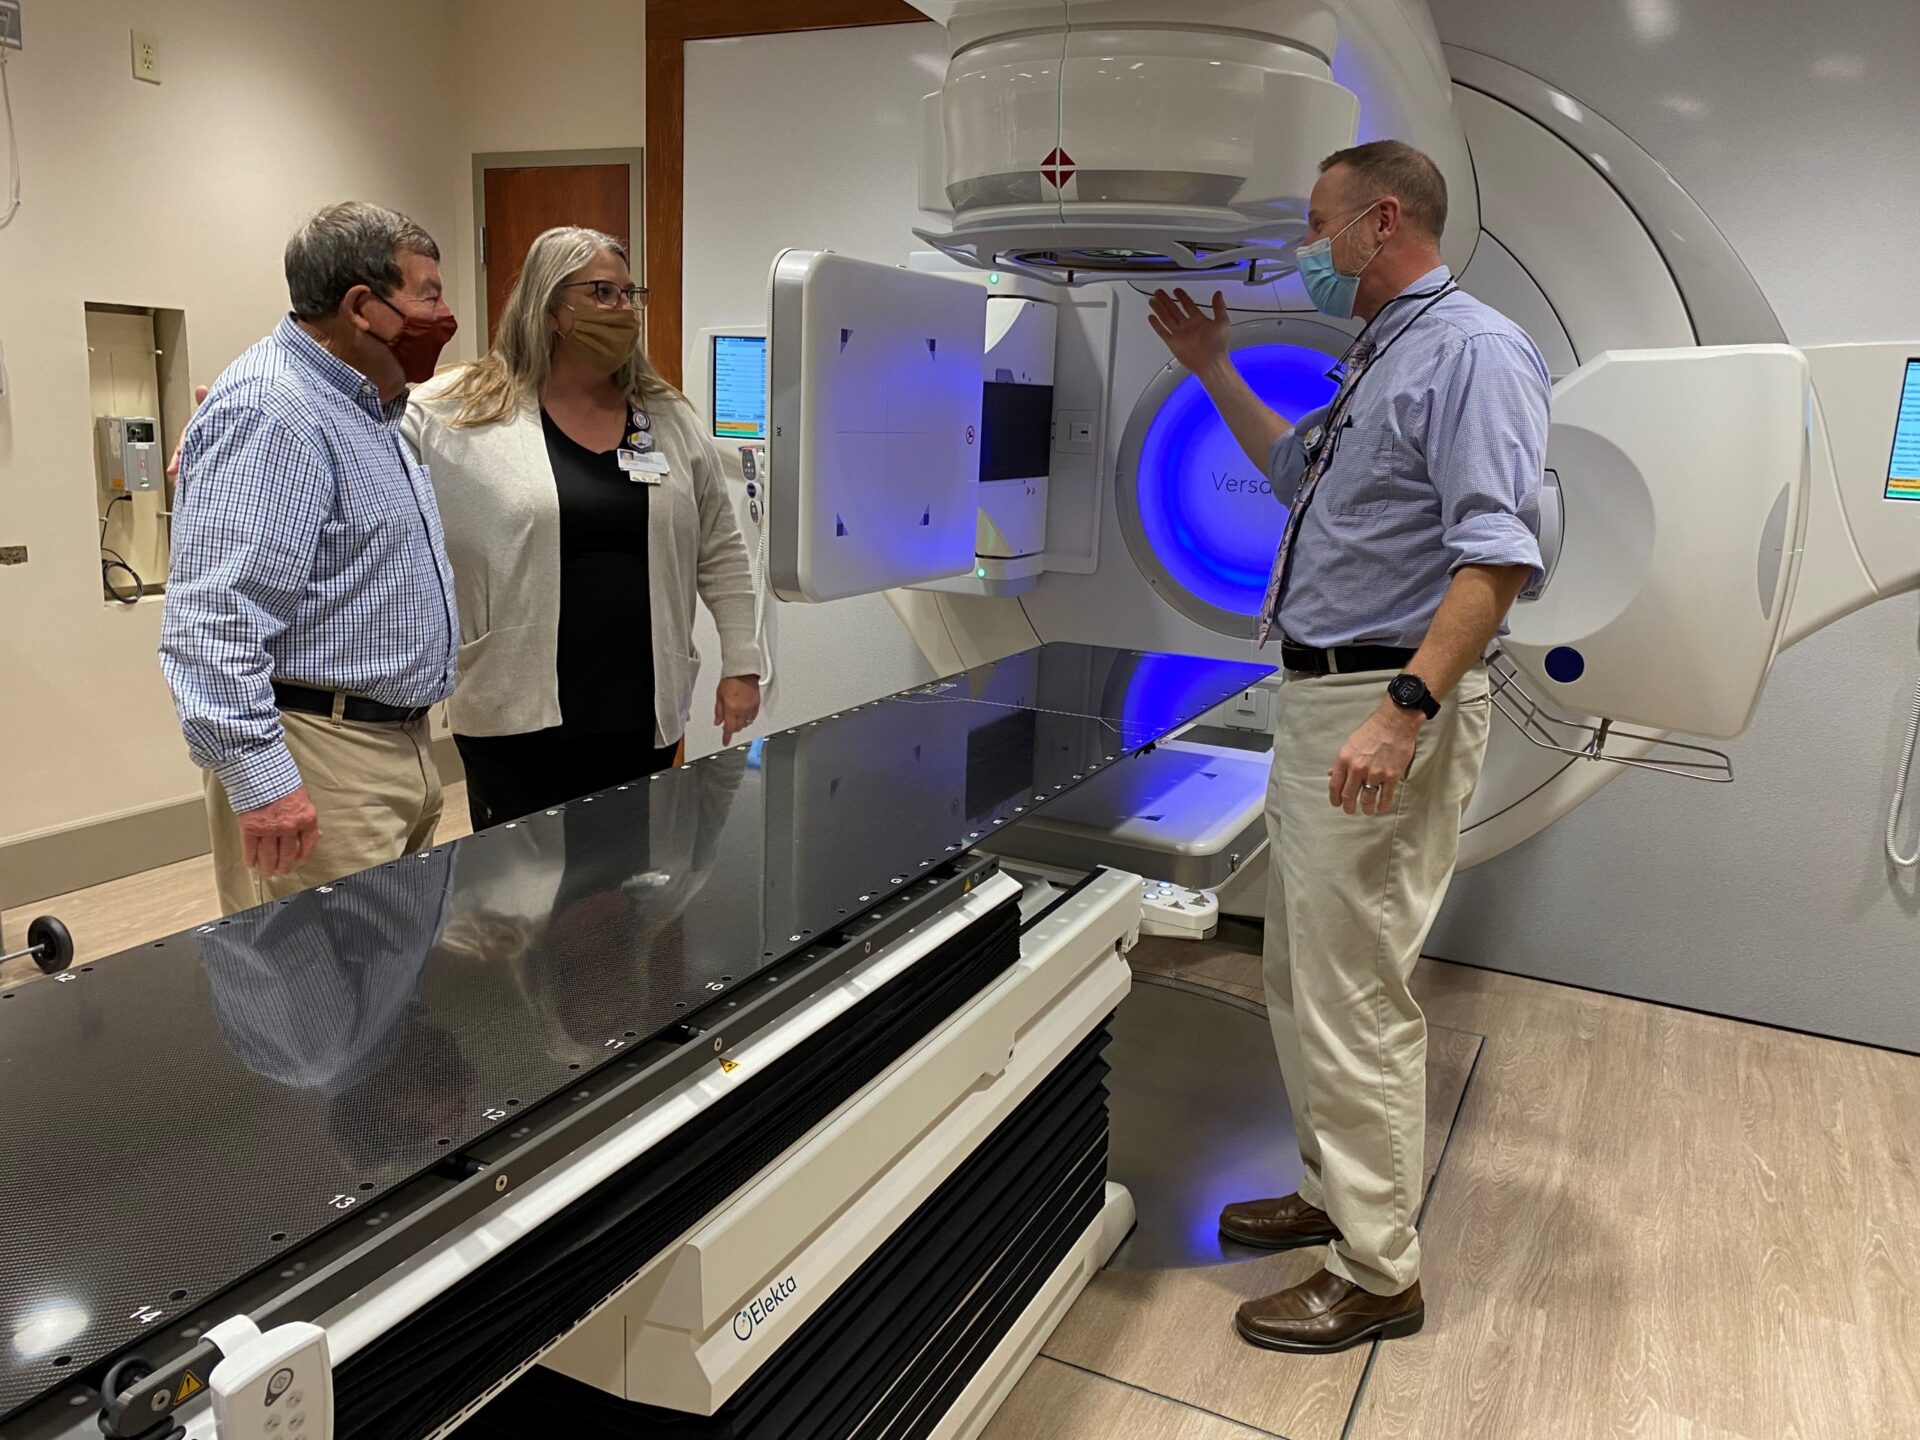 James Miller Discusses New Linear Accelerator